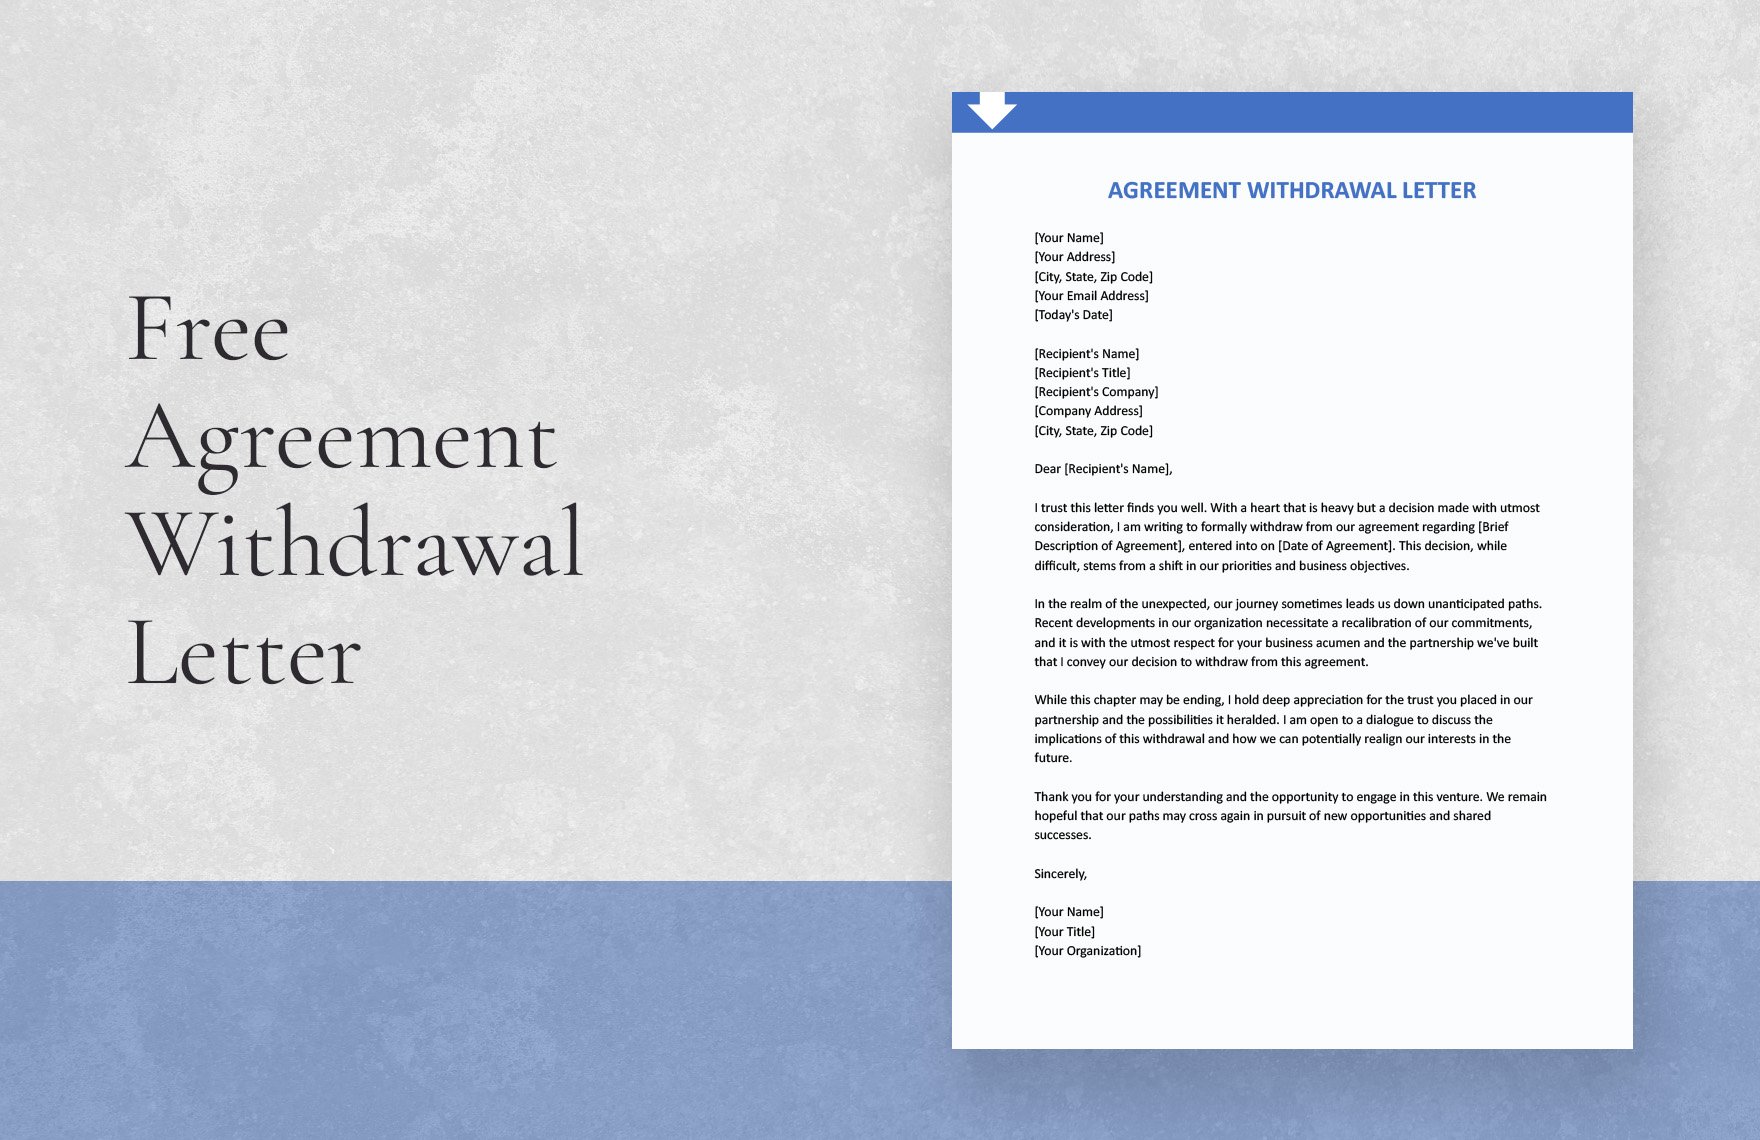 Agreement Withdrawal Letter